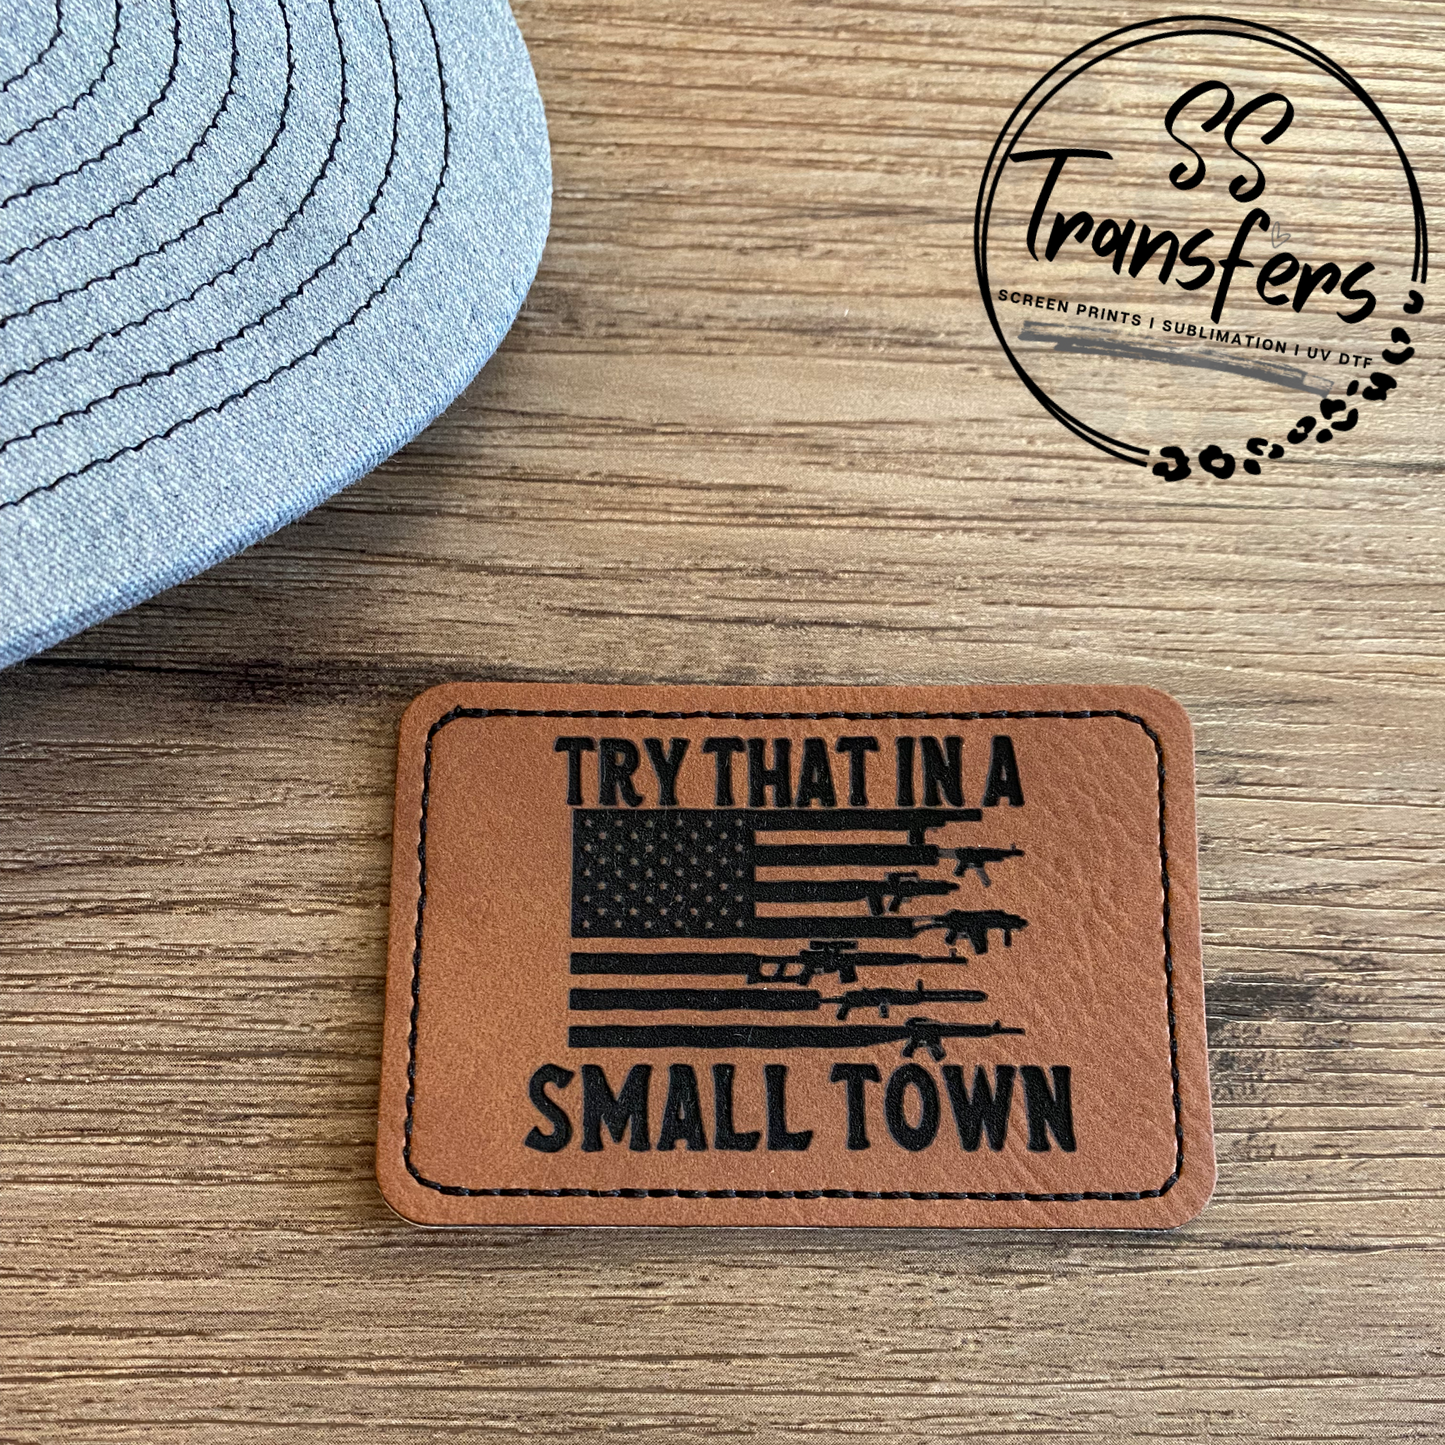 Small Town Collection Leather Patches